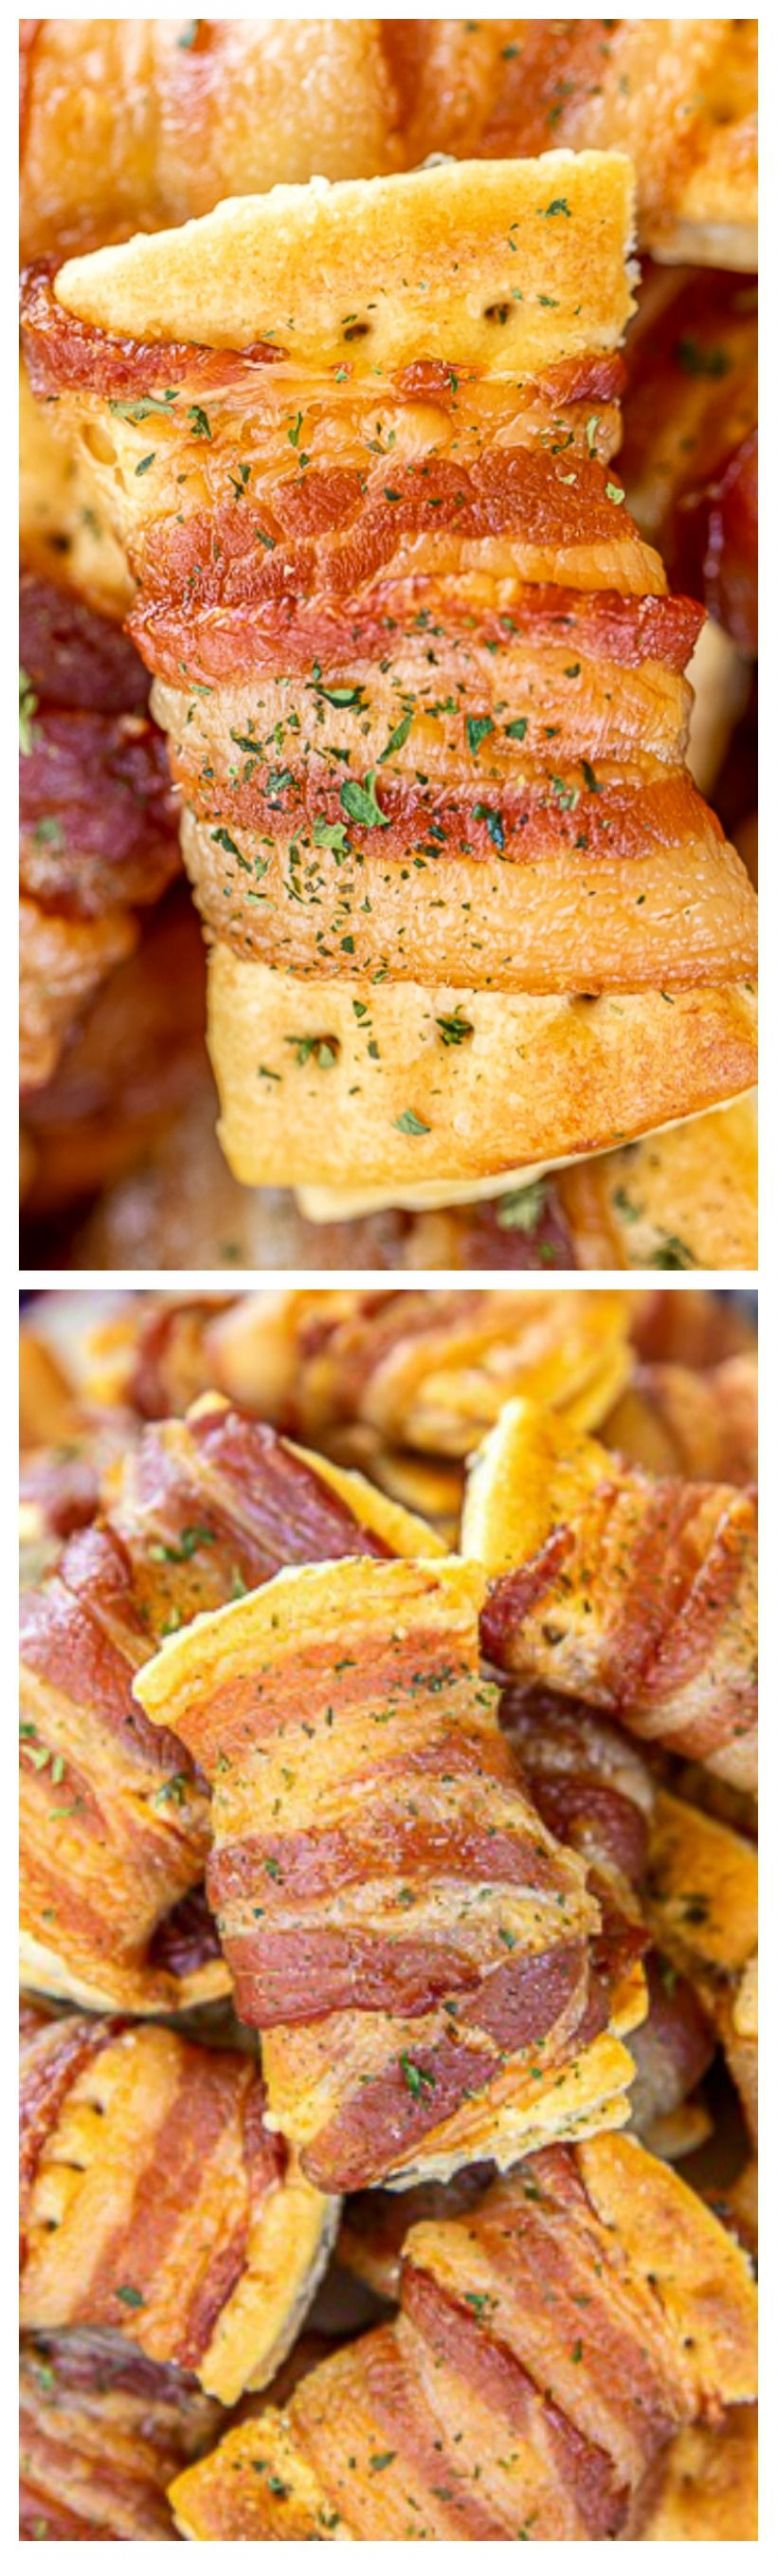 Bacon Wrapped Appetizers Cream Cheese
 Bacon Wrapped Cream Cheese Crackers So addictive in